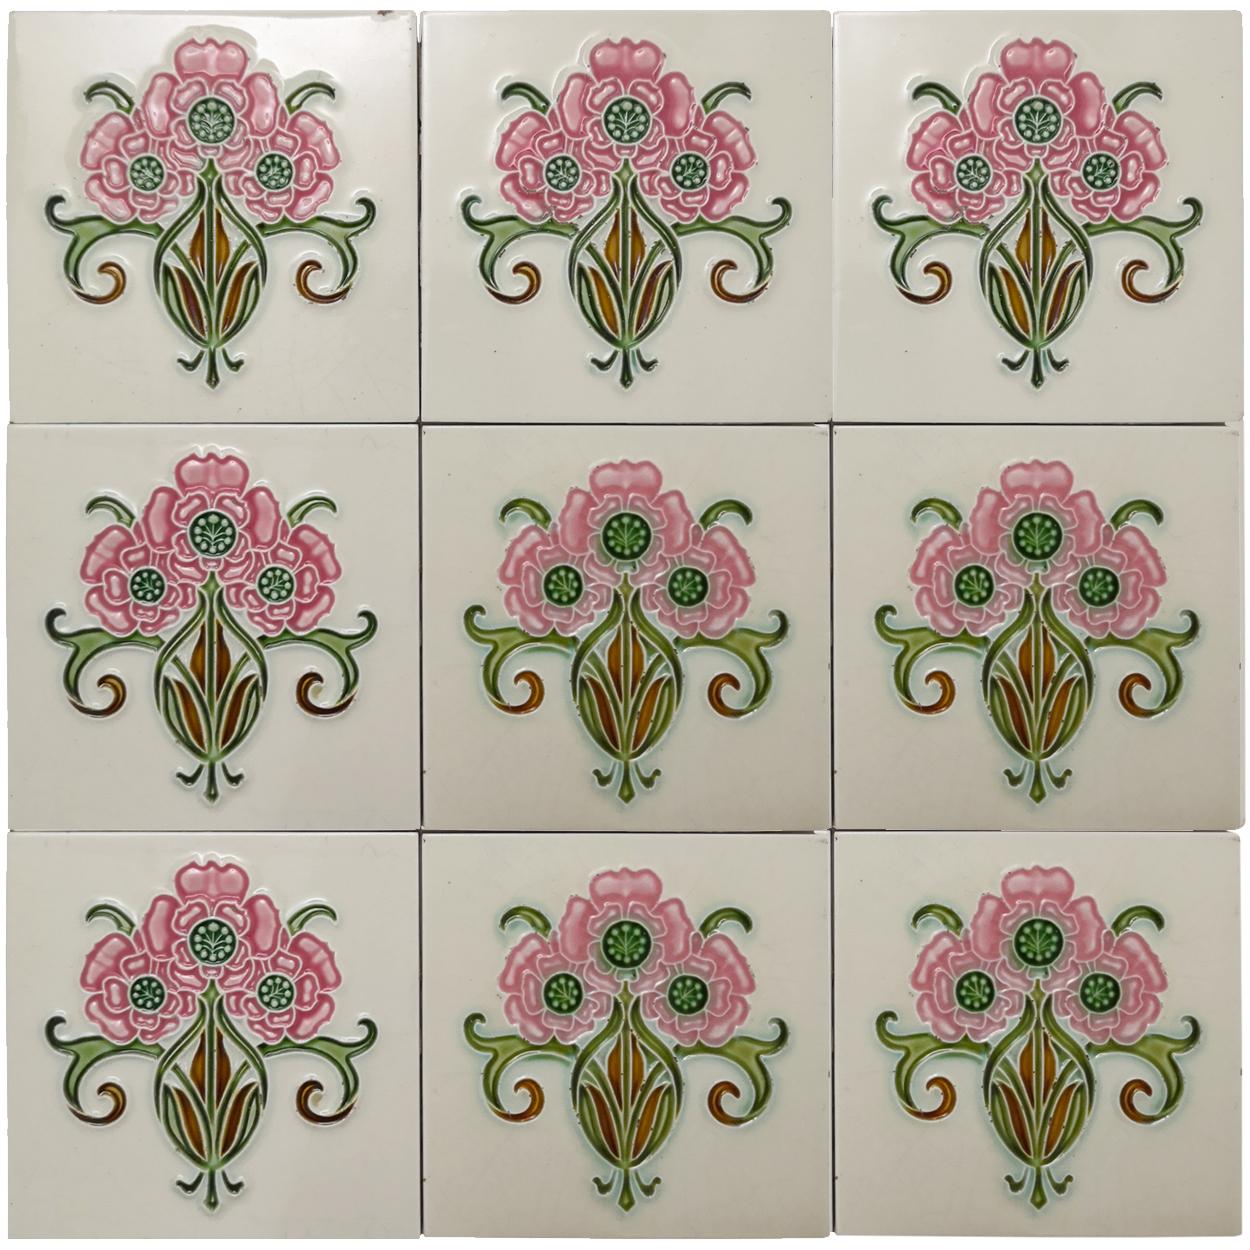 This is an amazing set of antique Art Nouveau handmade tiles. A beautiful relief and a rich rose green, brown and creme color. These tiles would be charming displayed on easels, framed or incorporated into a custom tile design.

Please note that